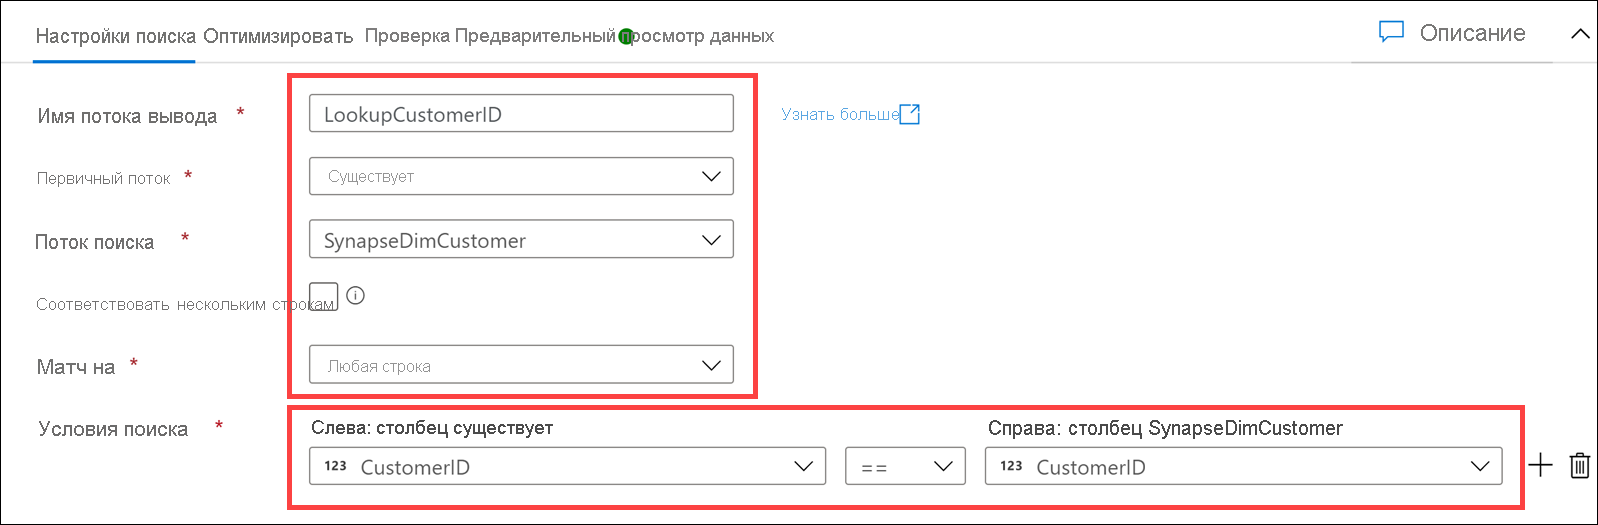 The Lookup settings form is configured as described.